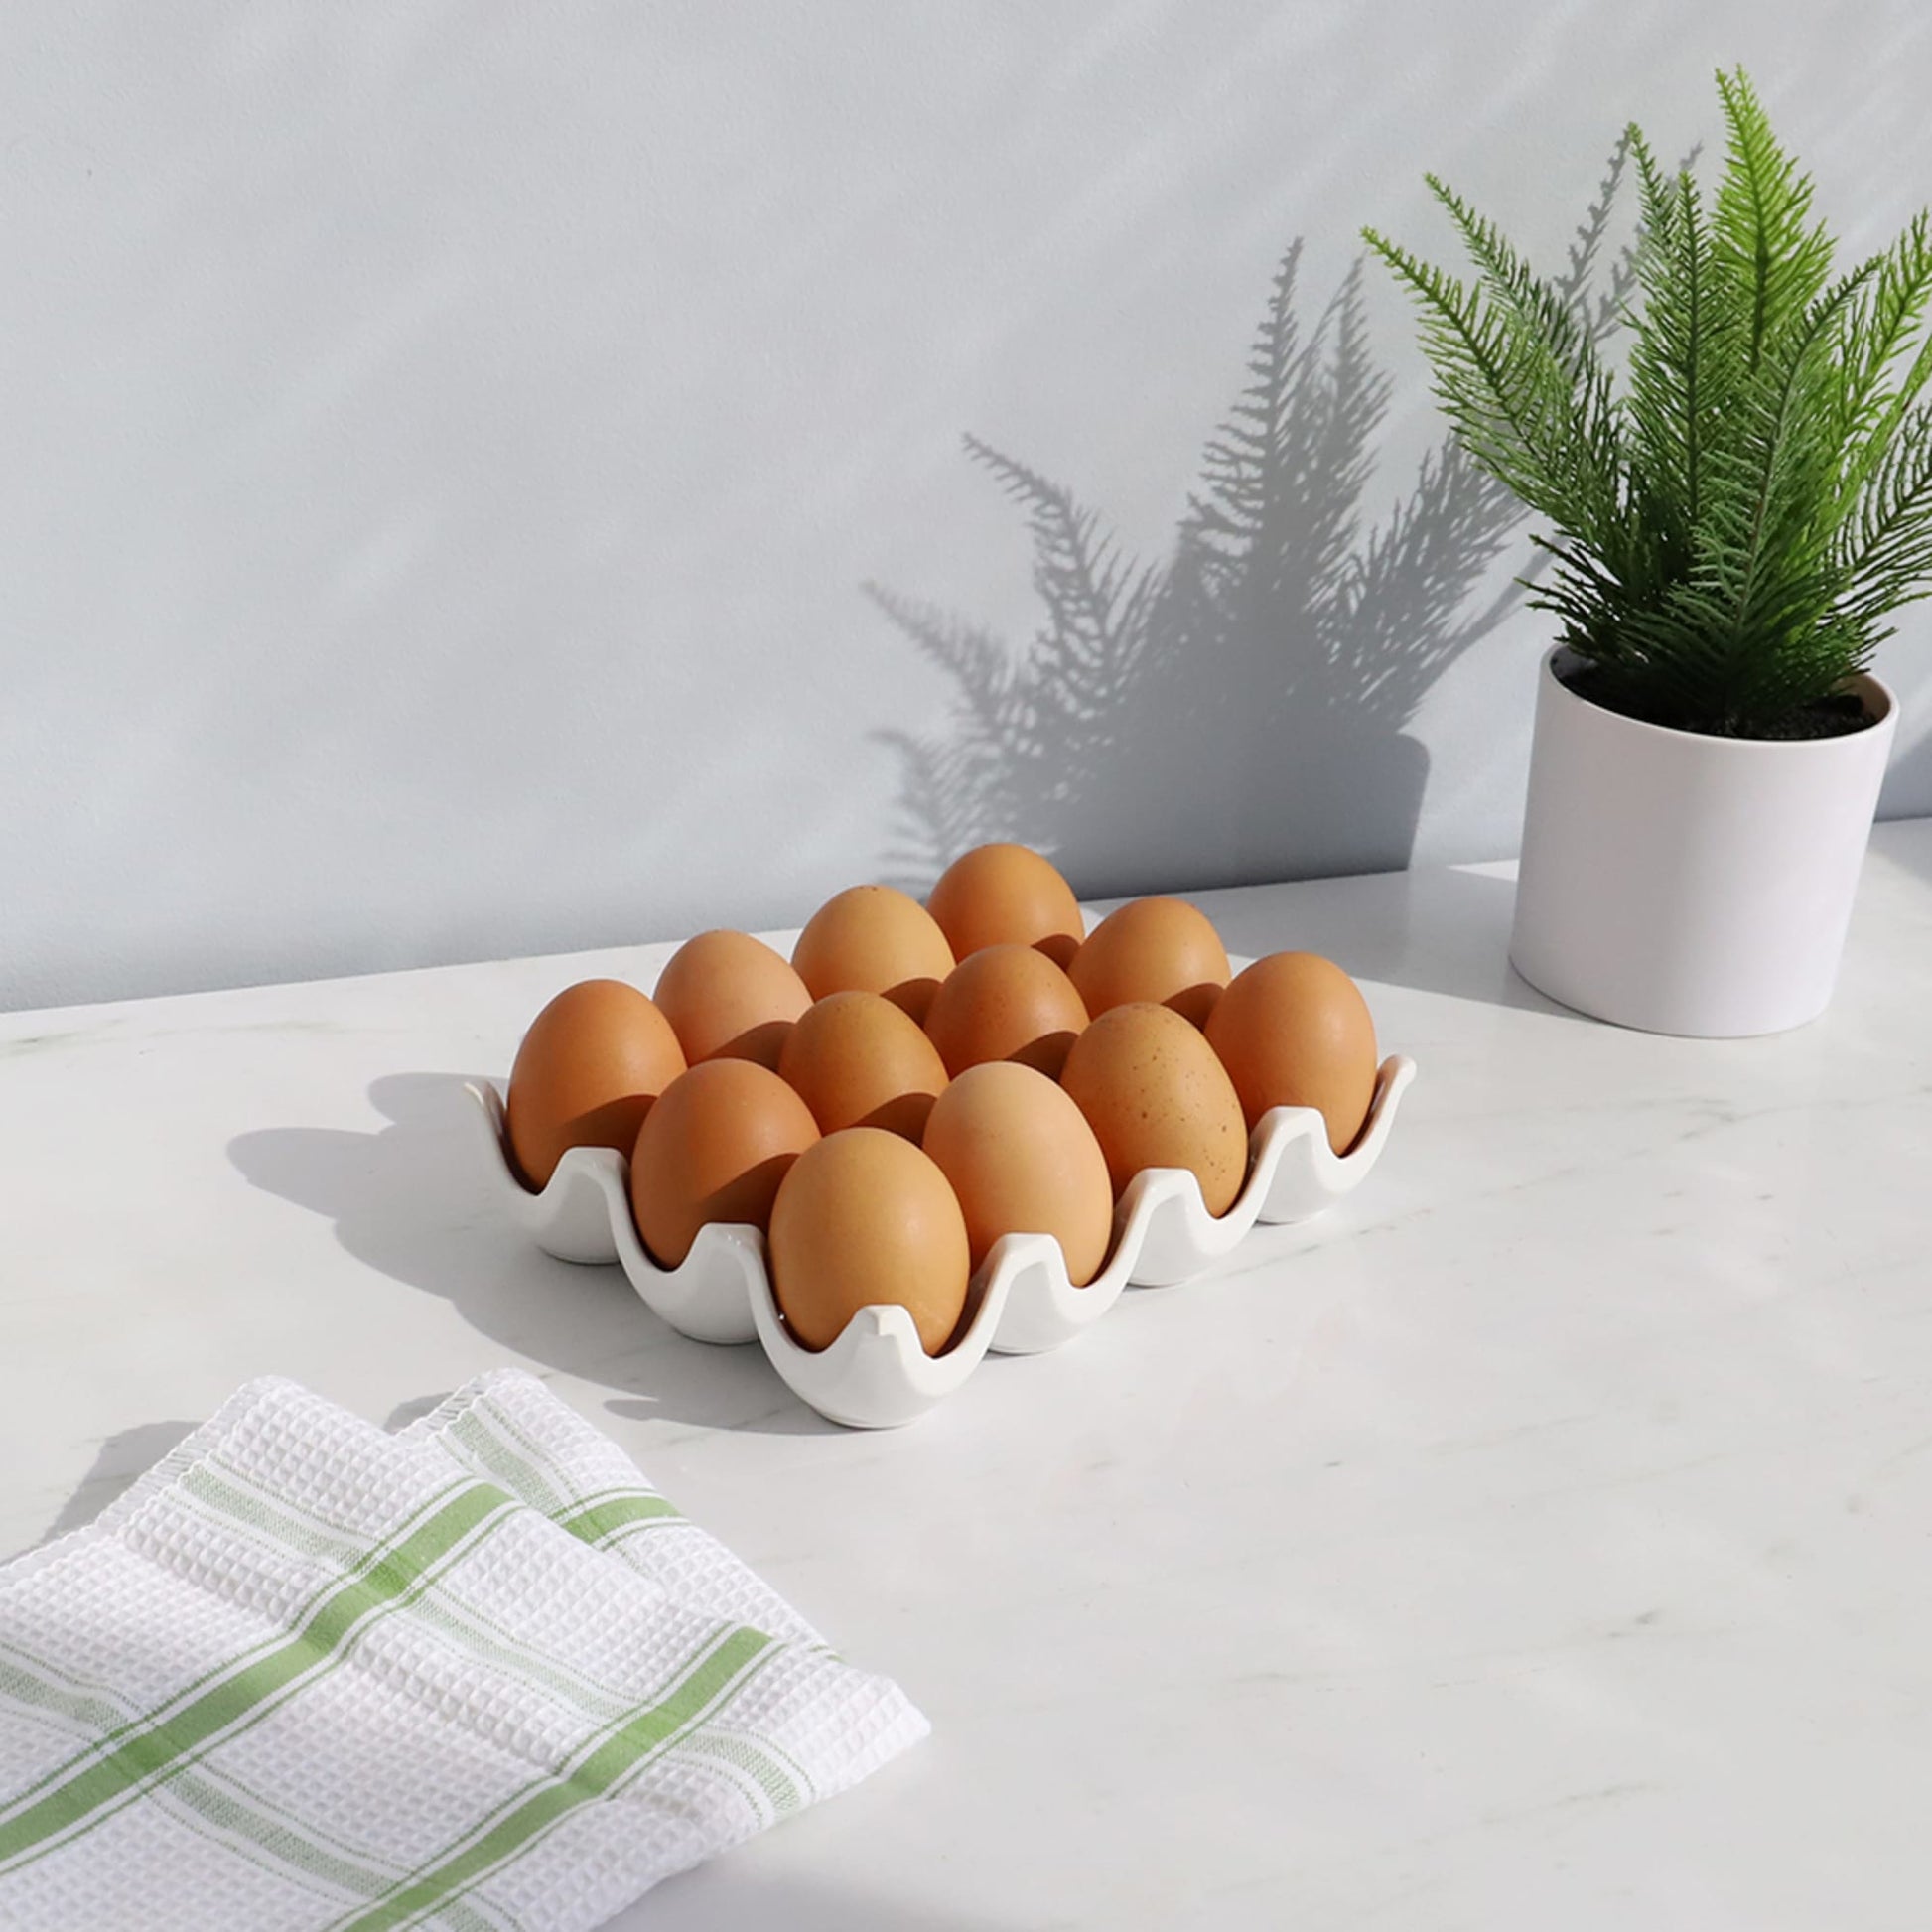 Egg Basket, Collapsible Mini Egg Storage for Fresh Eggs - Can